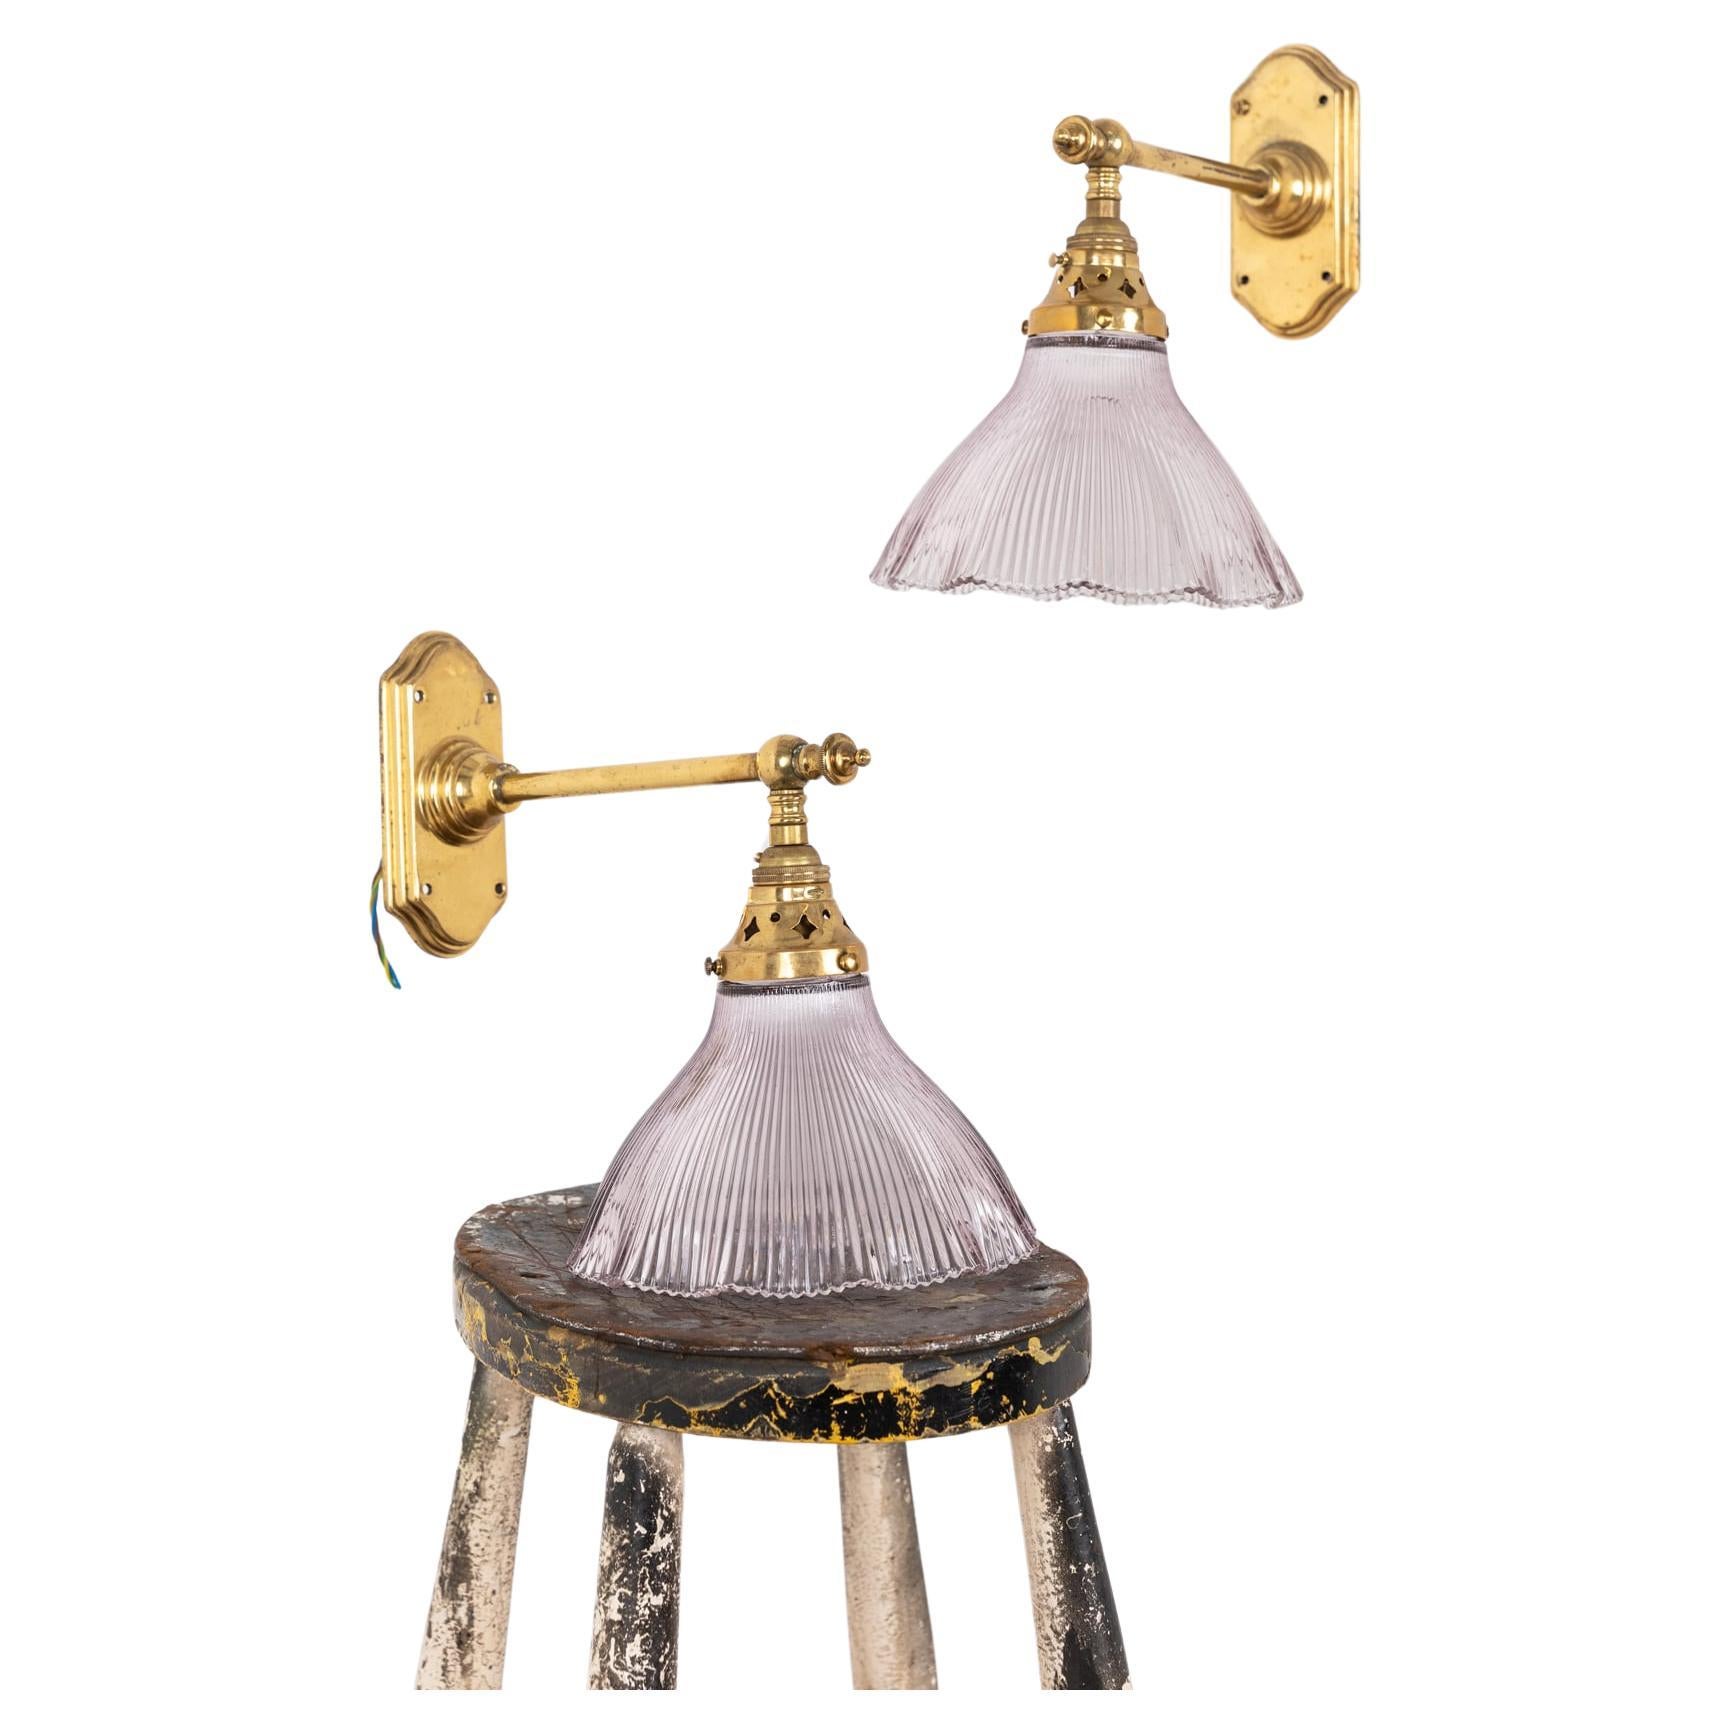 Pair of Vintage Antique Brass Holophane Wall Lamp Sconce Lights, c.1930 For Sale